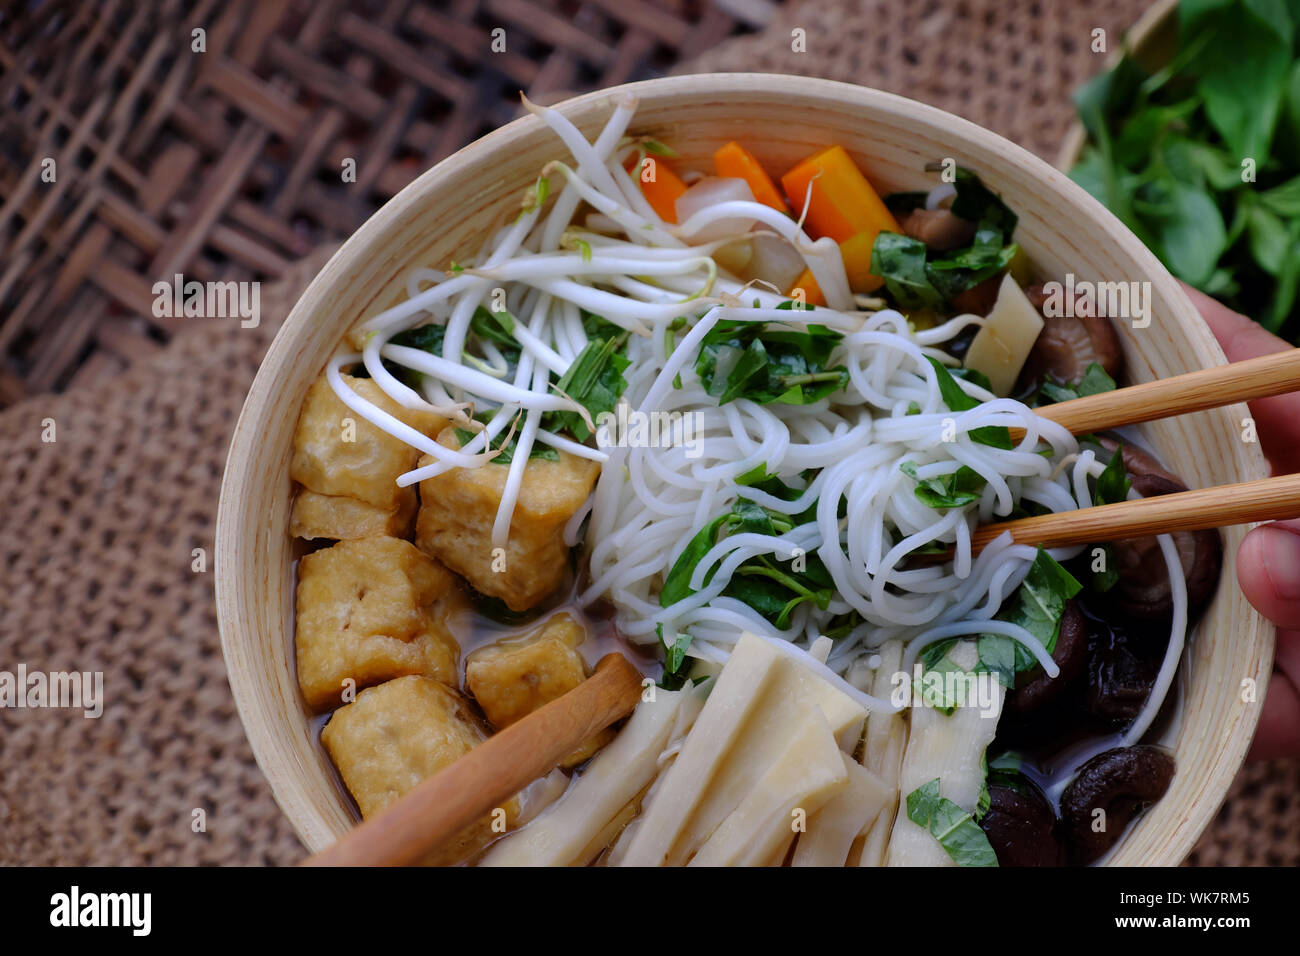 People eating breakfast, bun mang bowl, bamboo shoot noodles with tofu, mushroom, laksa leaves, herbs, an simple dish from vegetables but delicious Stock Photo